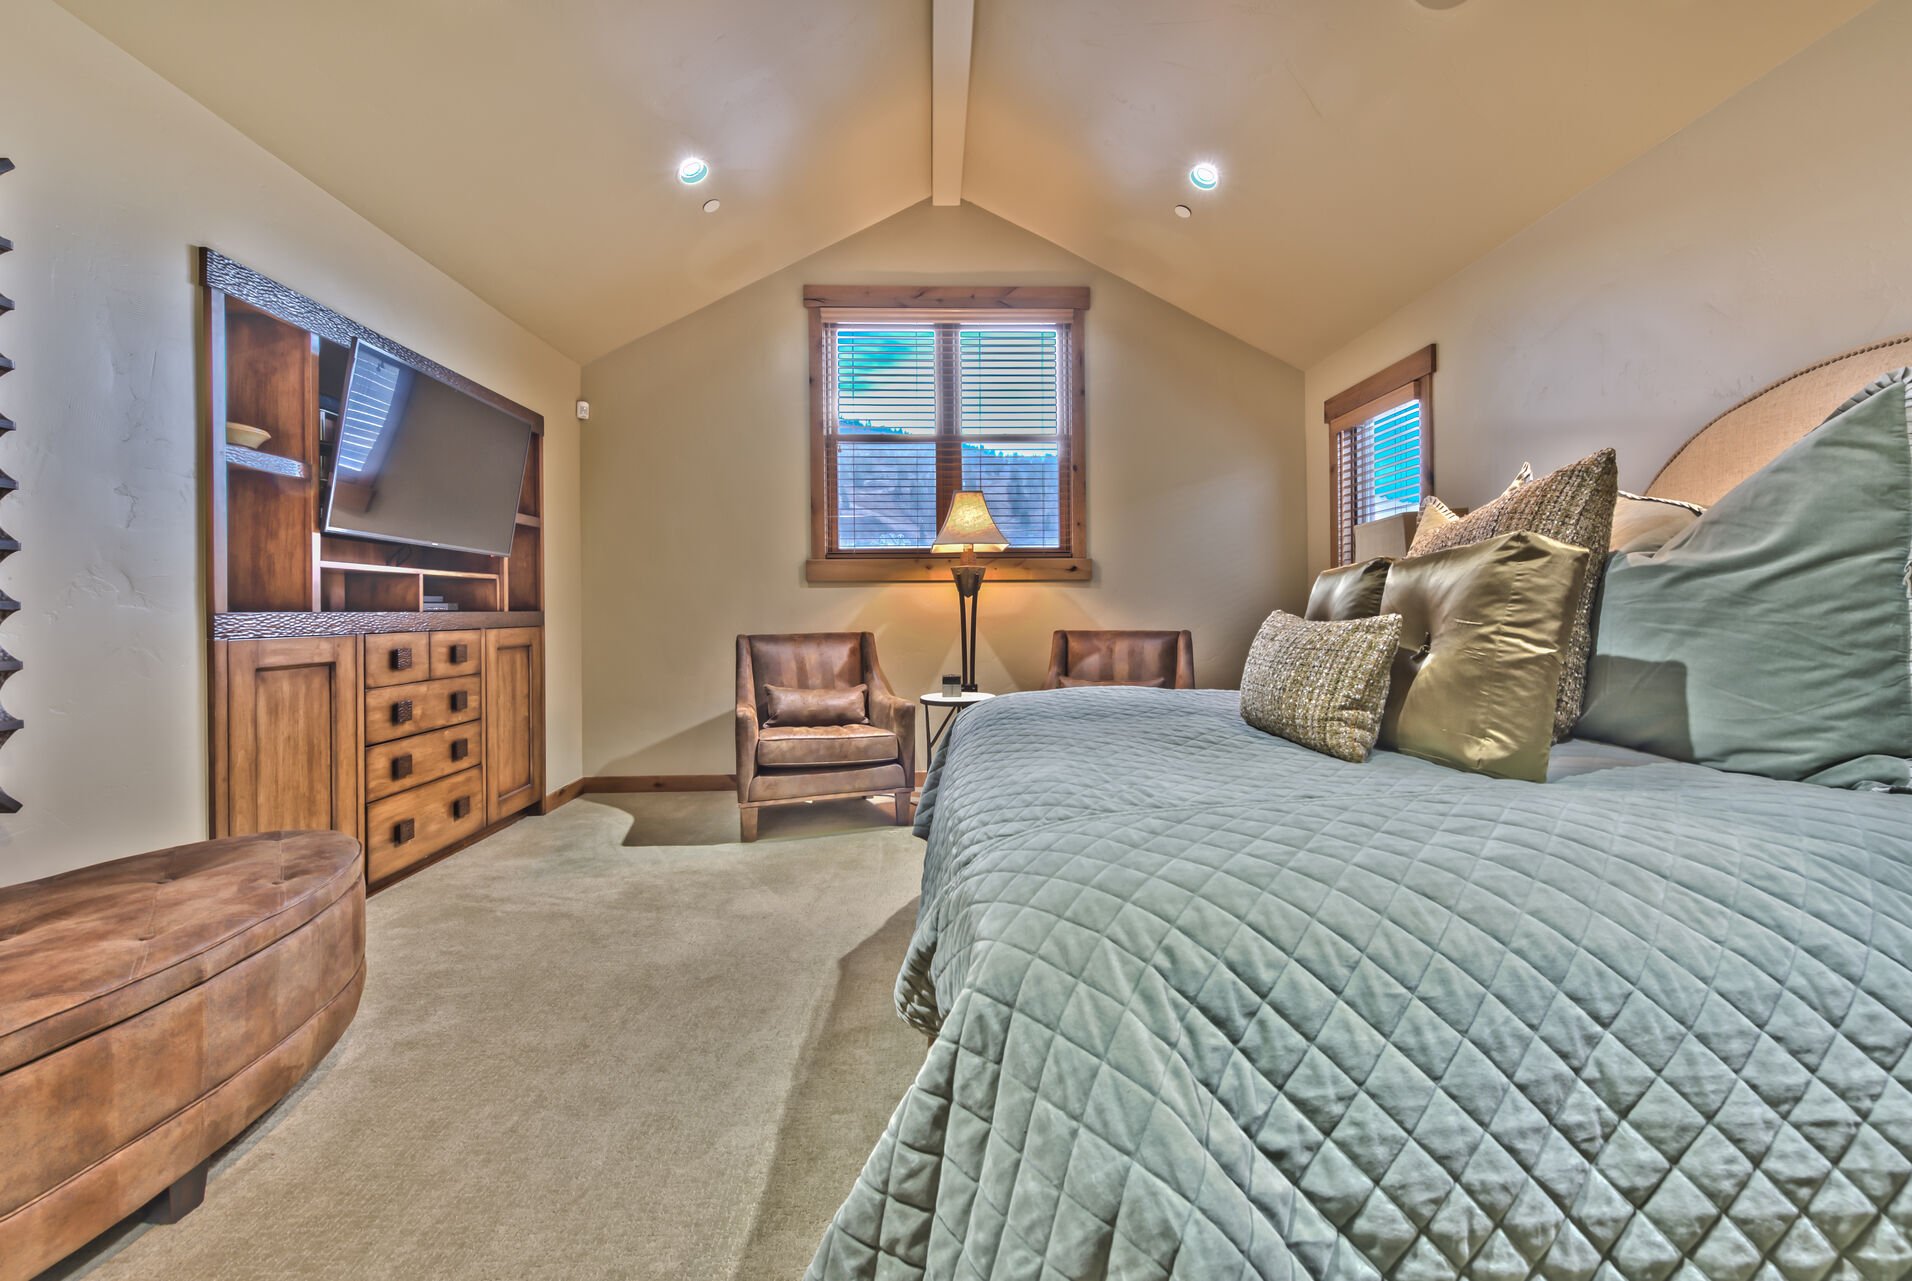 Grand Master Bedroom - Level 4 - ing Bed, TV, Private Bath and Views of Park City!